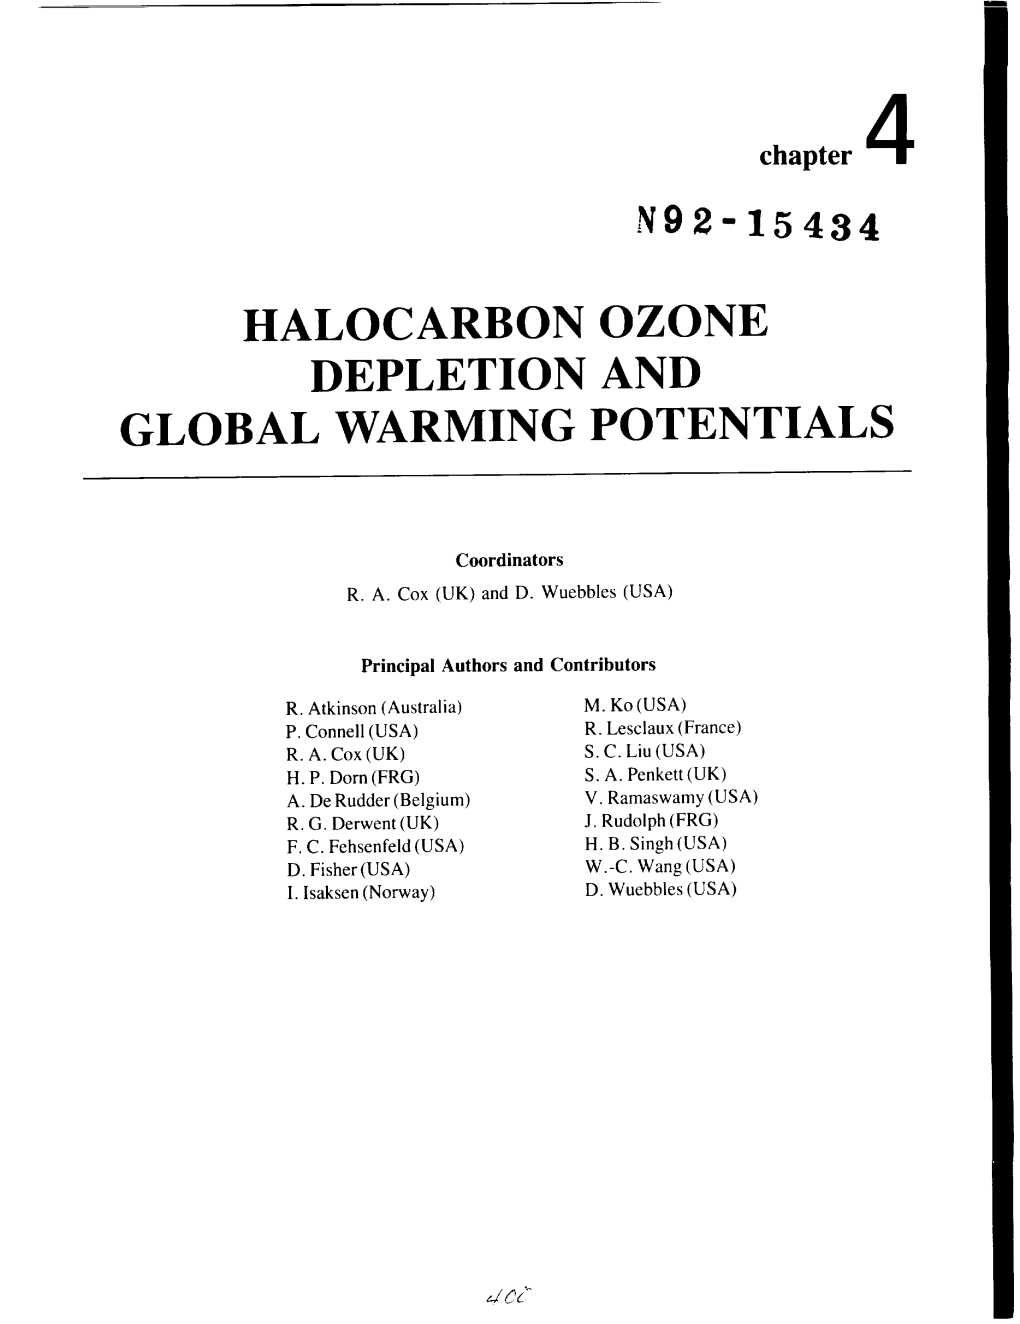 Halocarbon Ozone Depletion and Global Warming Potentials